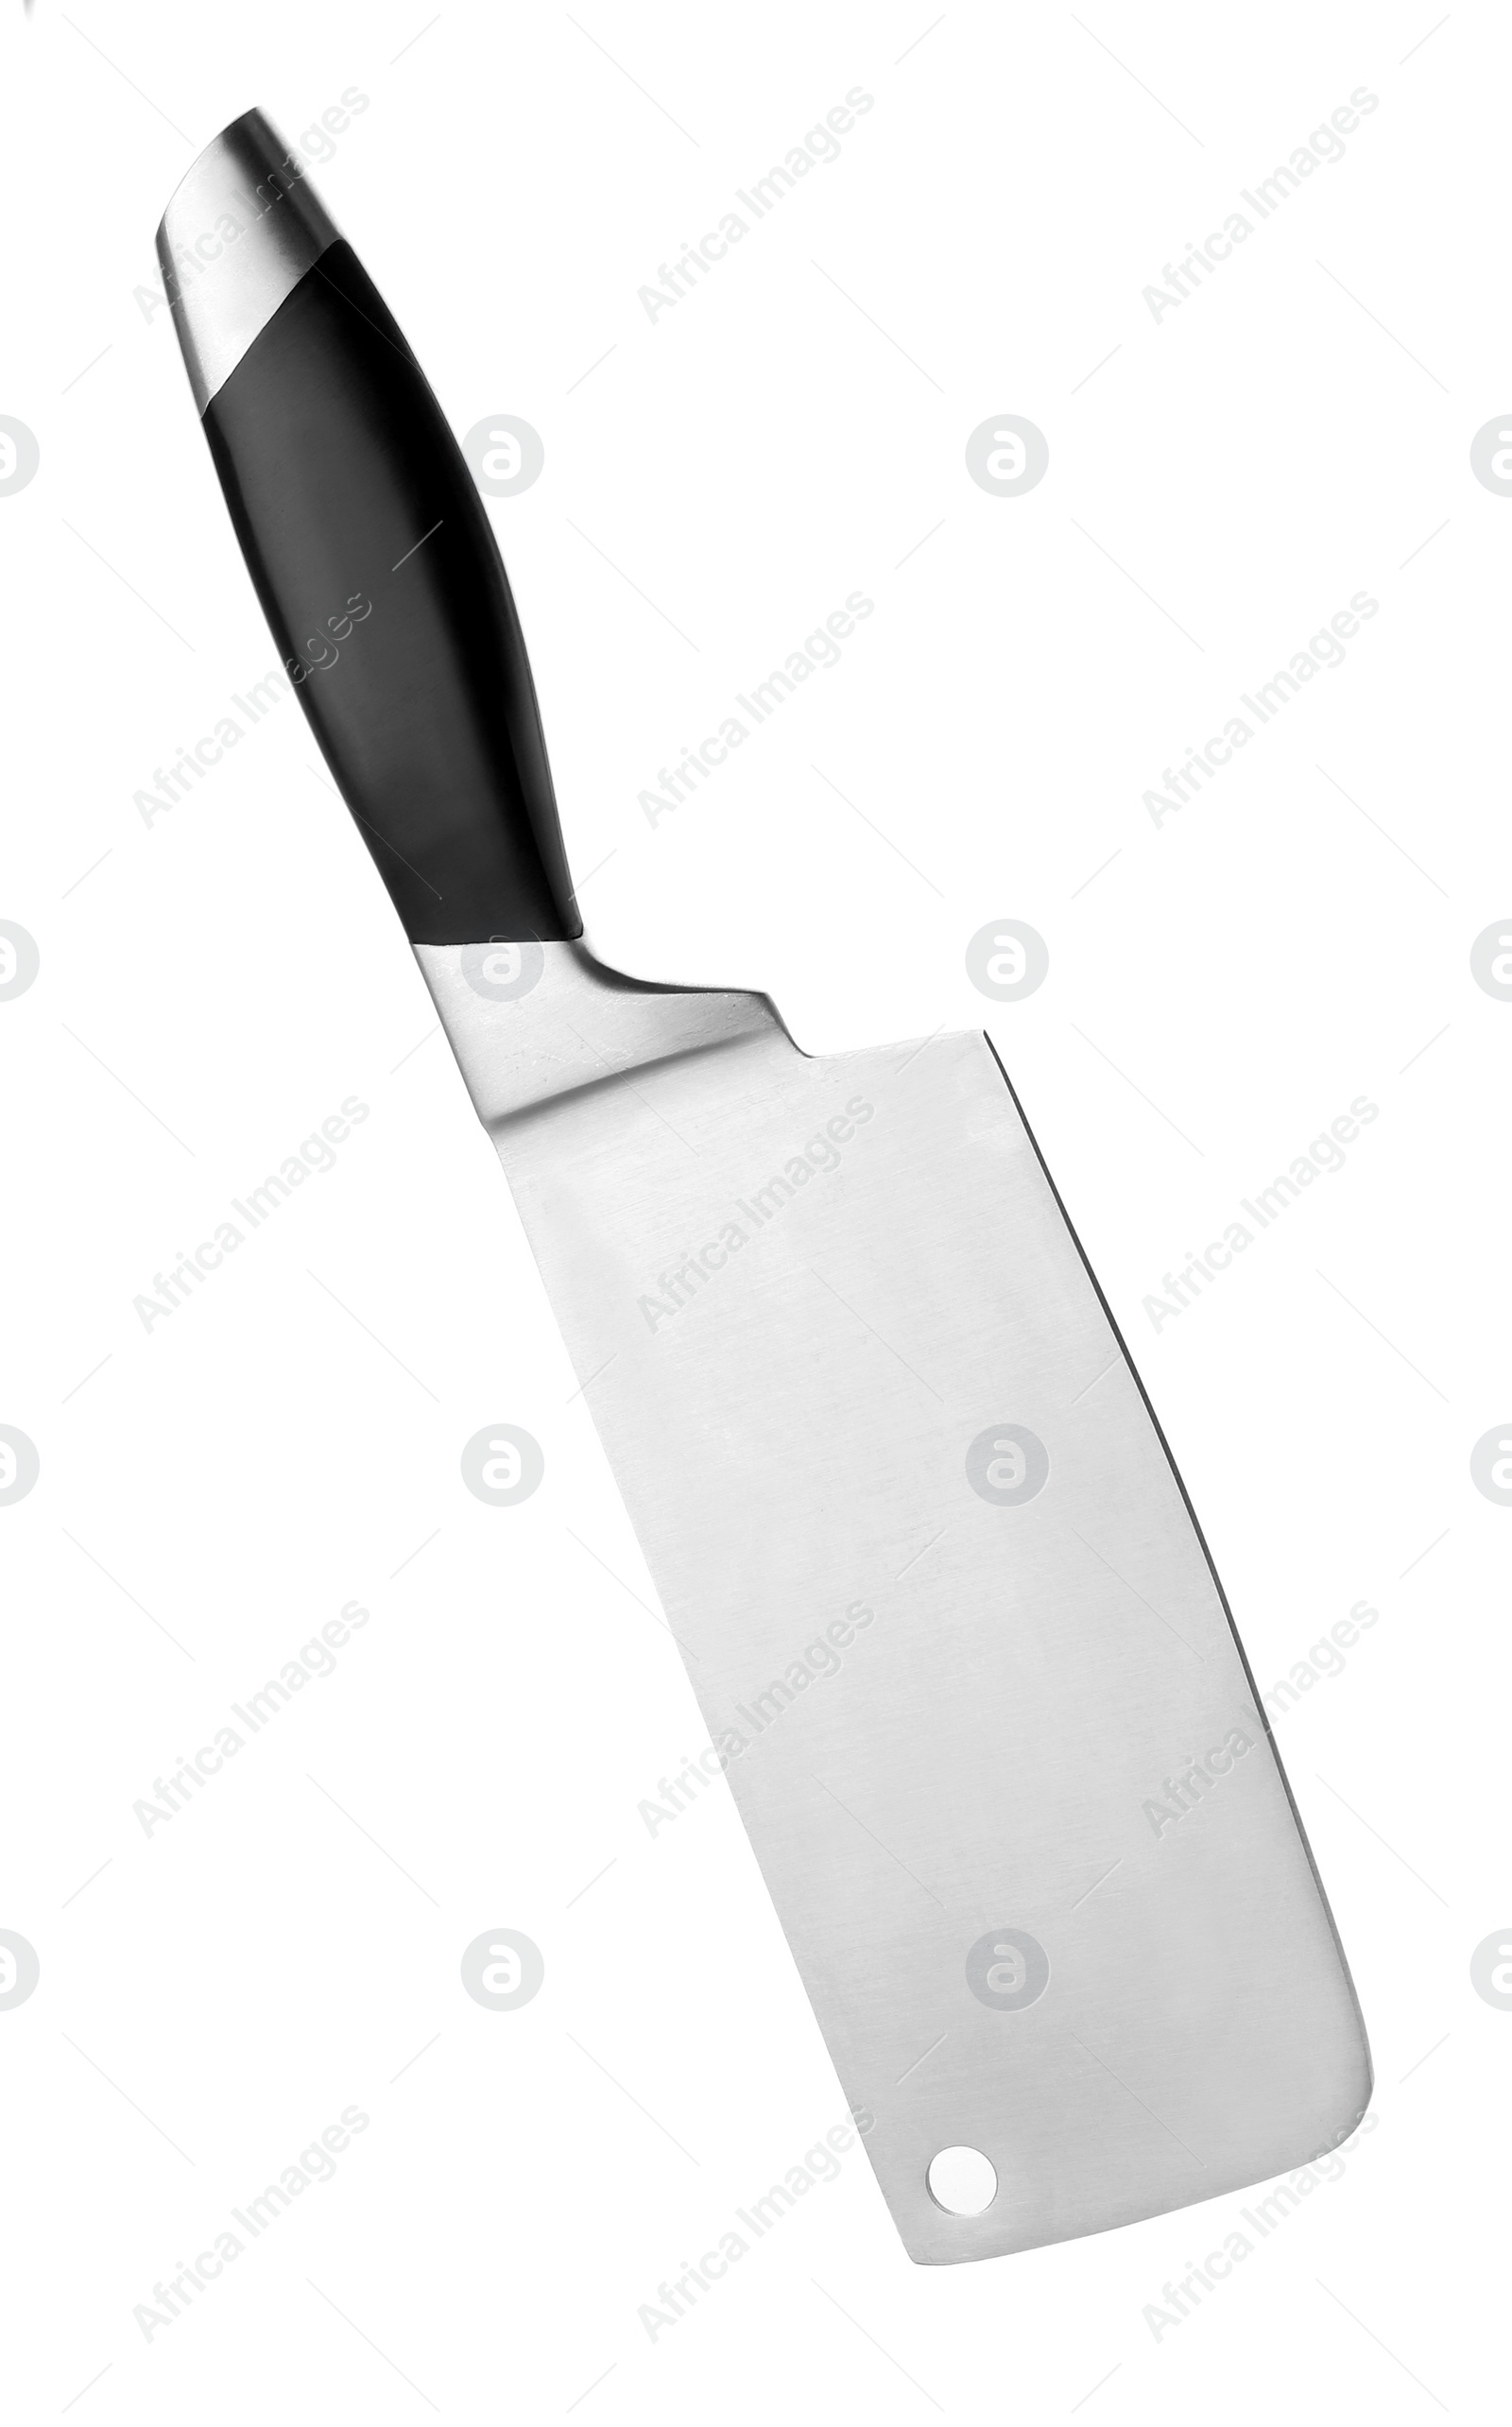 Photo of Large sharp cleaver knife with black handle isolated on white